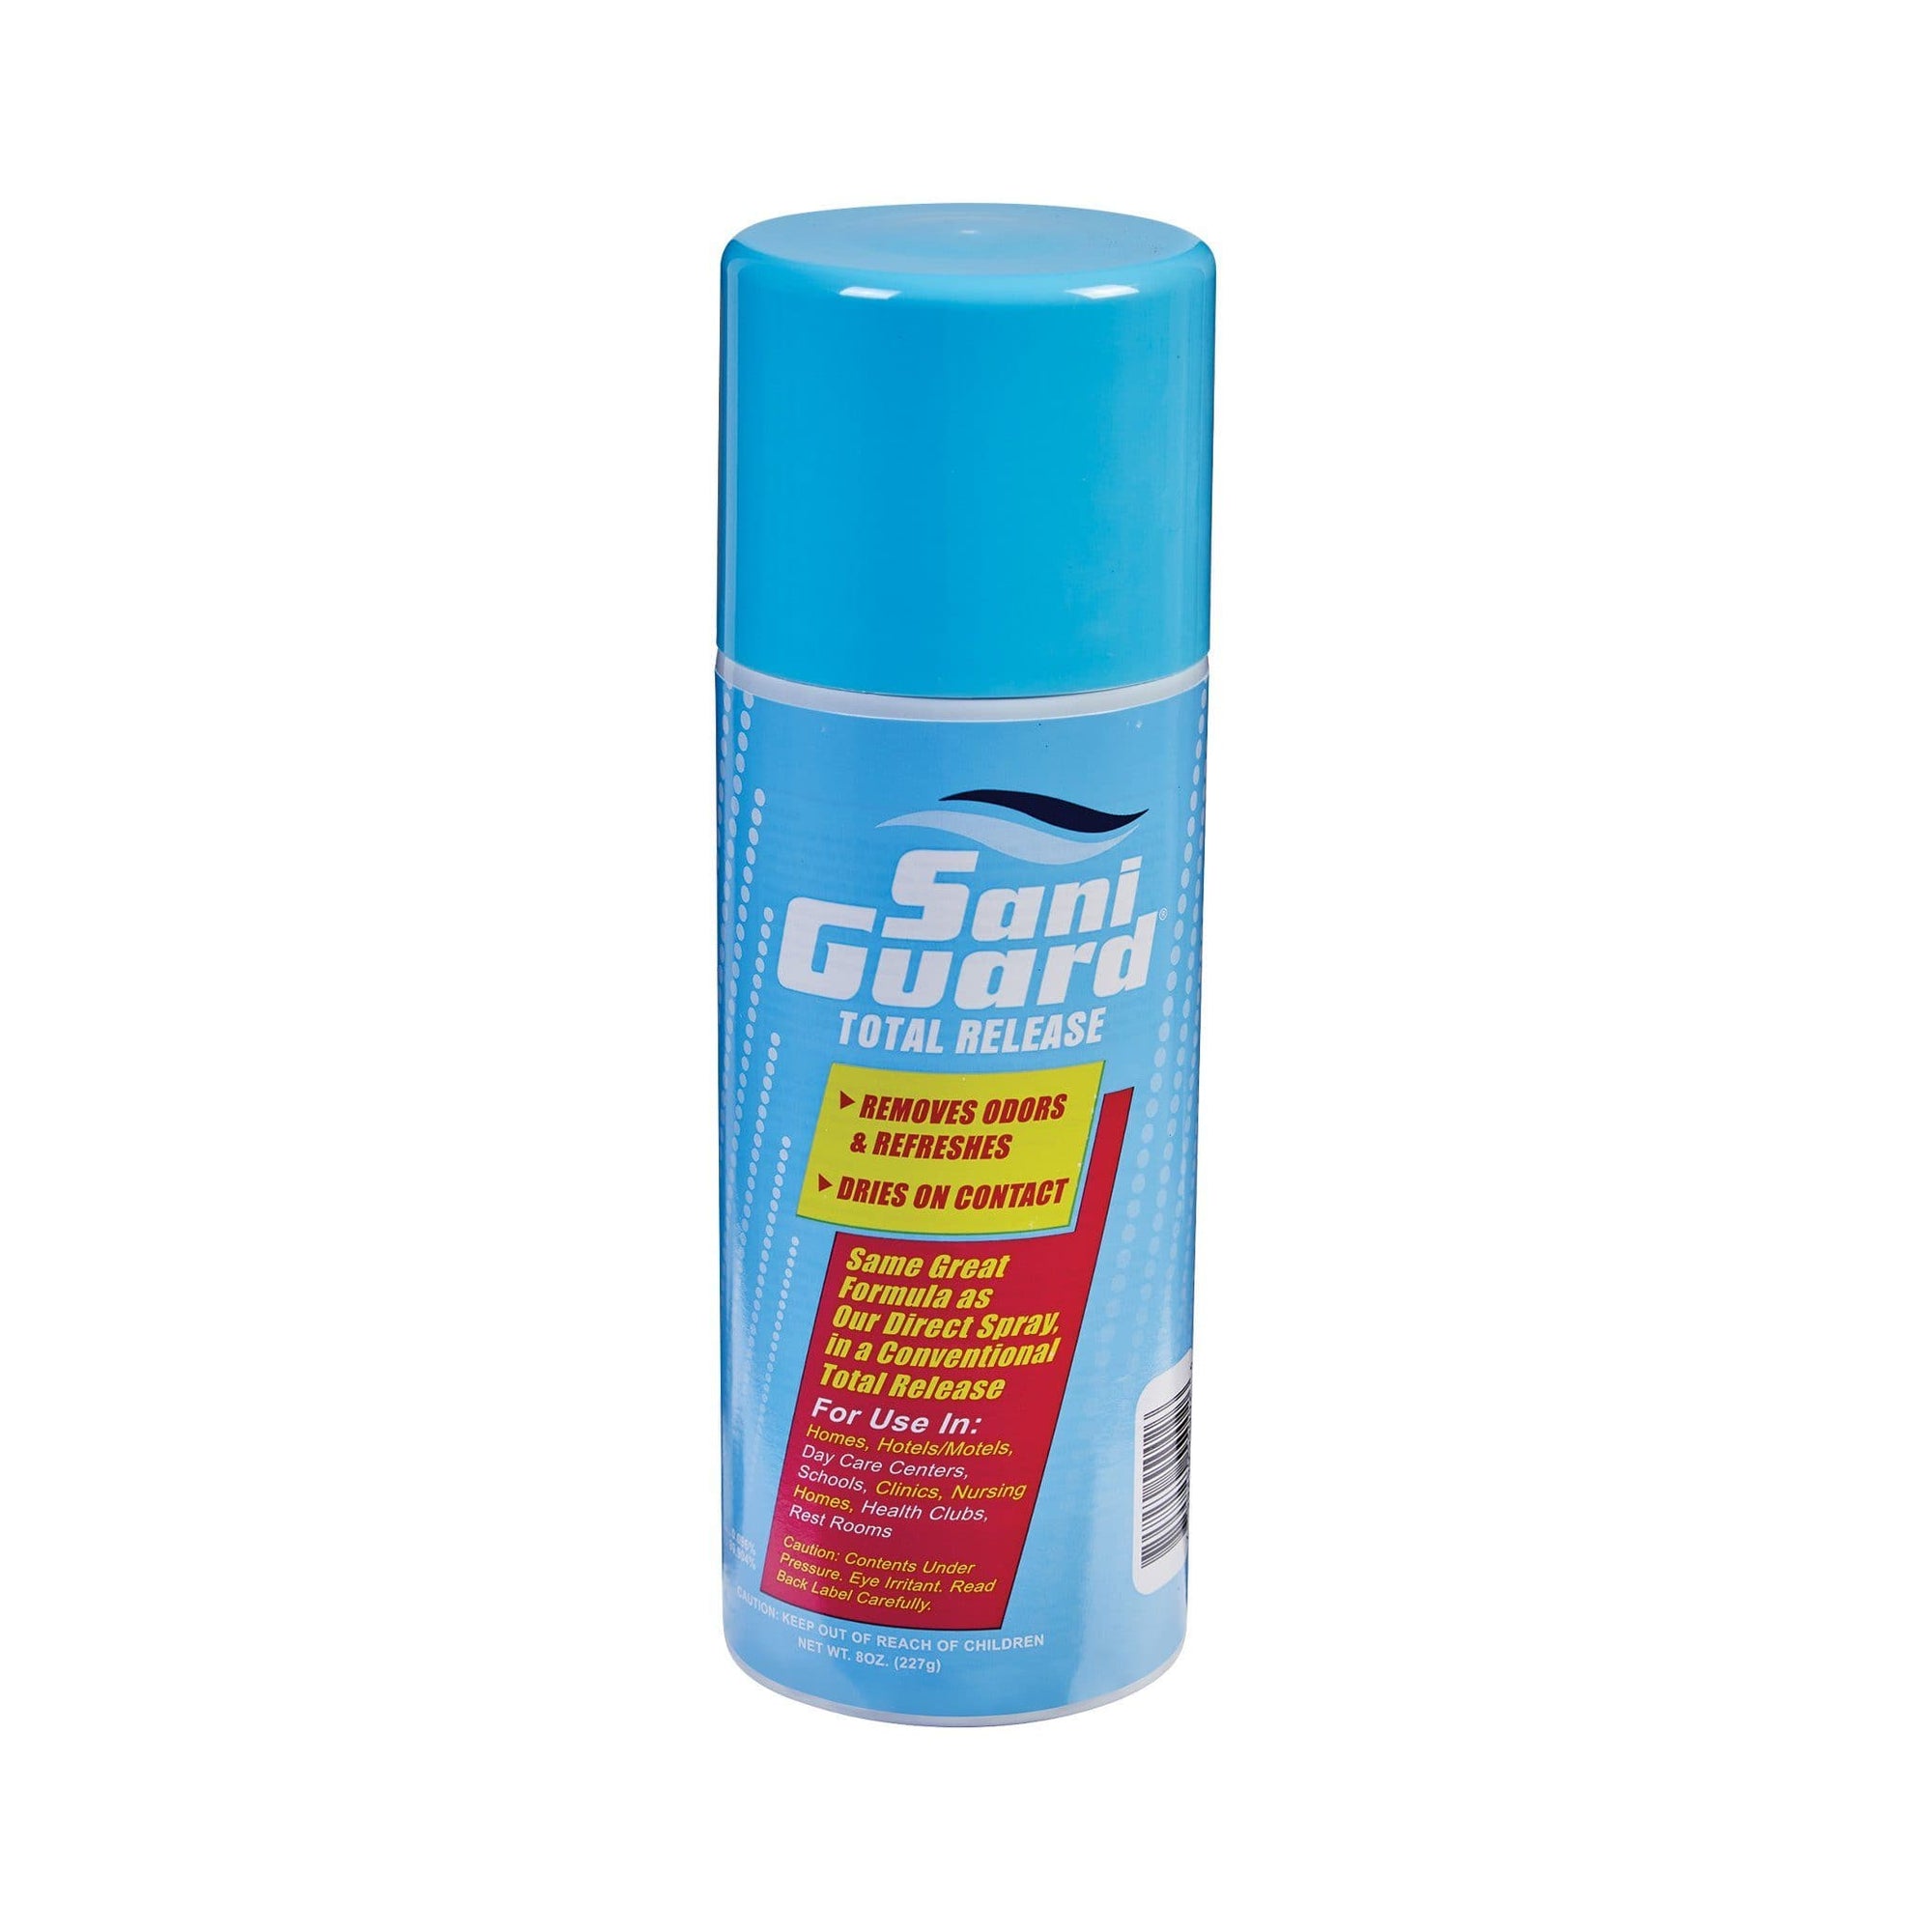 SaniGuard Total Release fogger sanitizes rooms and enclosed spaces in just 15 minutes.